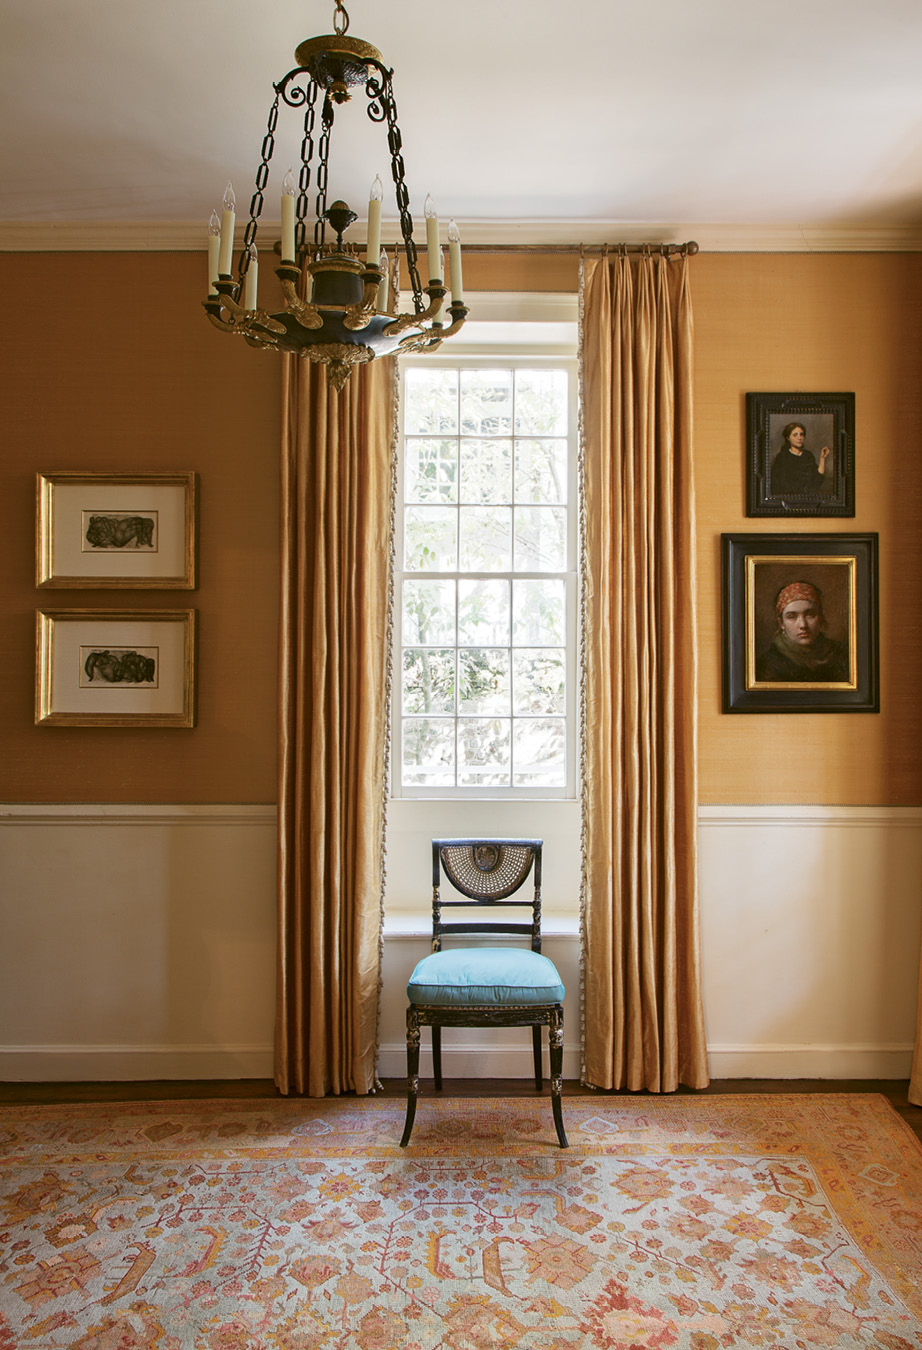 In the foyer, apricot-hued silk wall coverings and coordinating curtains provide an elegant backdrop for a pair of works by mid-century German Expressionist painter Otto Neumann and portraits by contemporary classical realists Daniela Astone and Charles Weed.